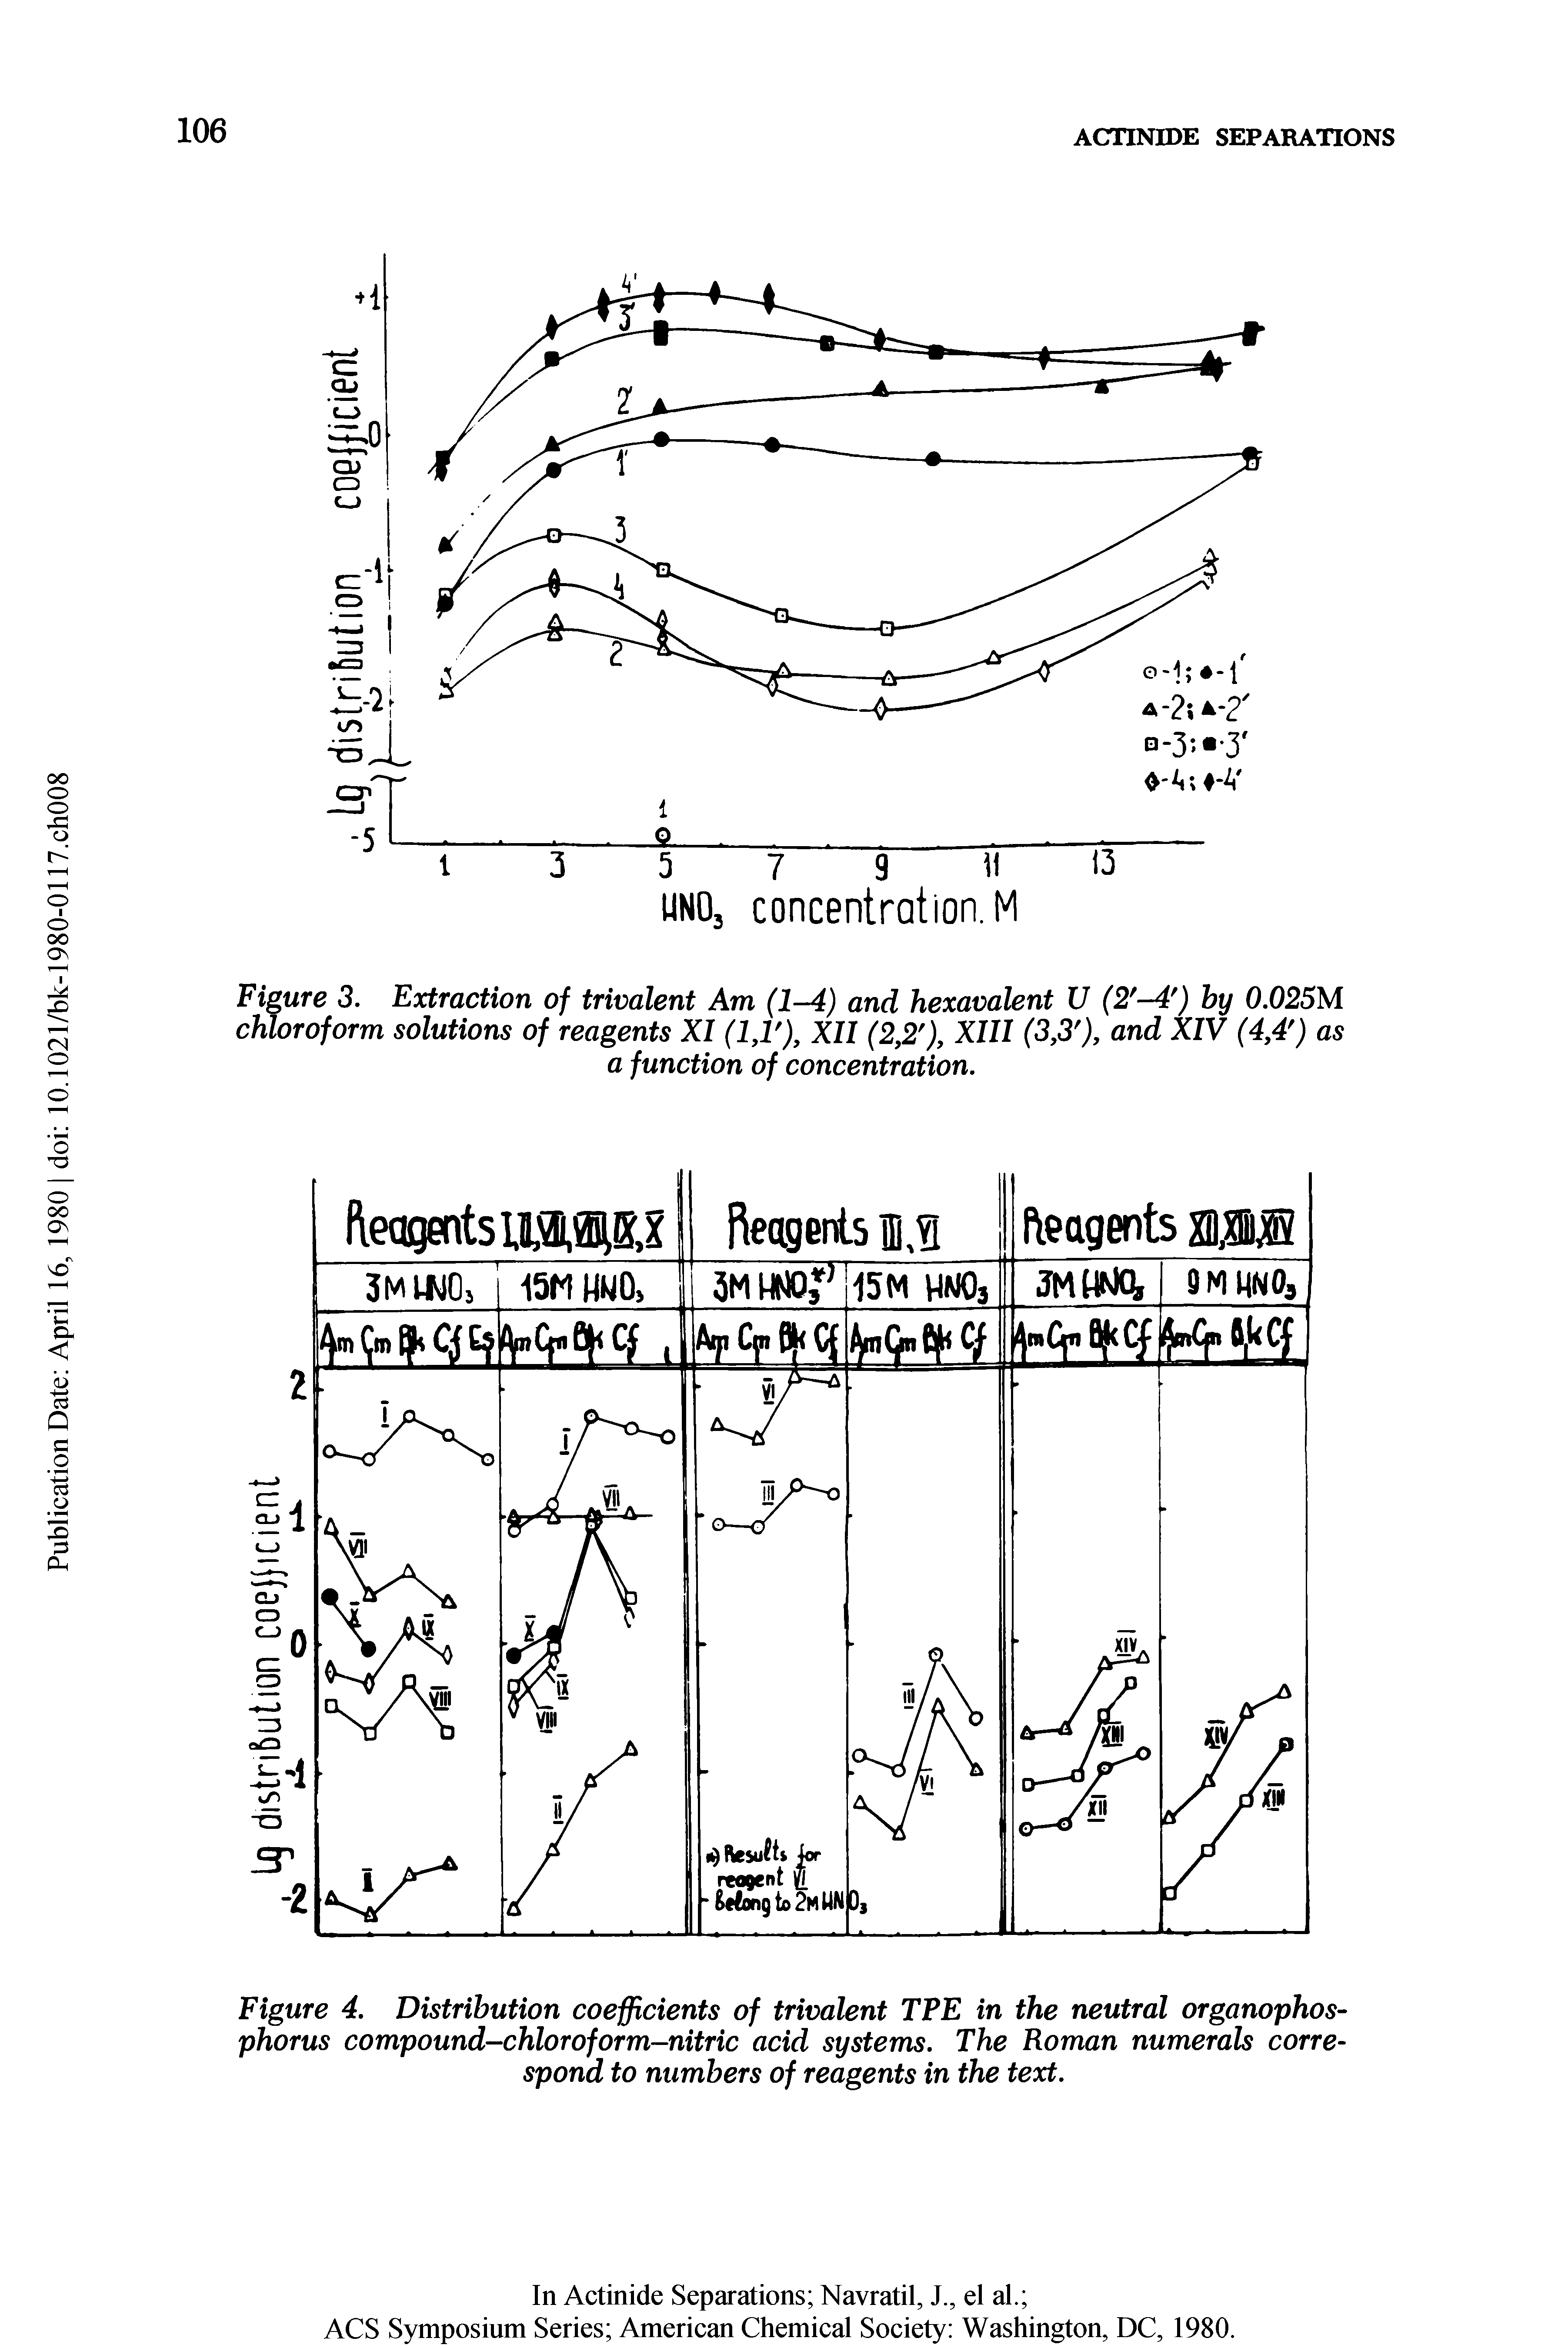 Figure 4. Distribution coefficients of trivalent TPE in the neutral organophos-phorus compound-chloroform-nitric acid systems. The Roman numerals correspond to numbers of reagents in the text.